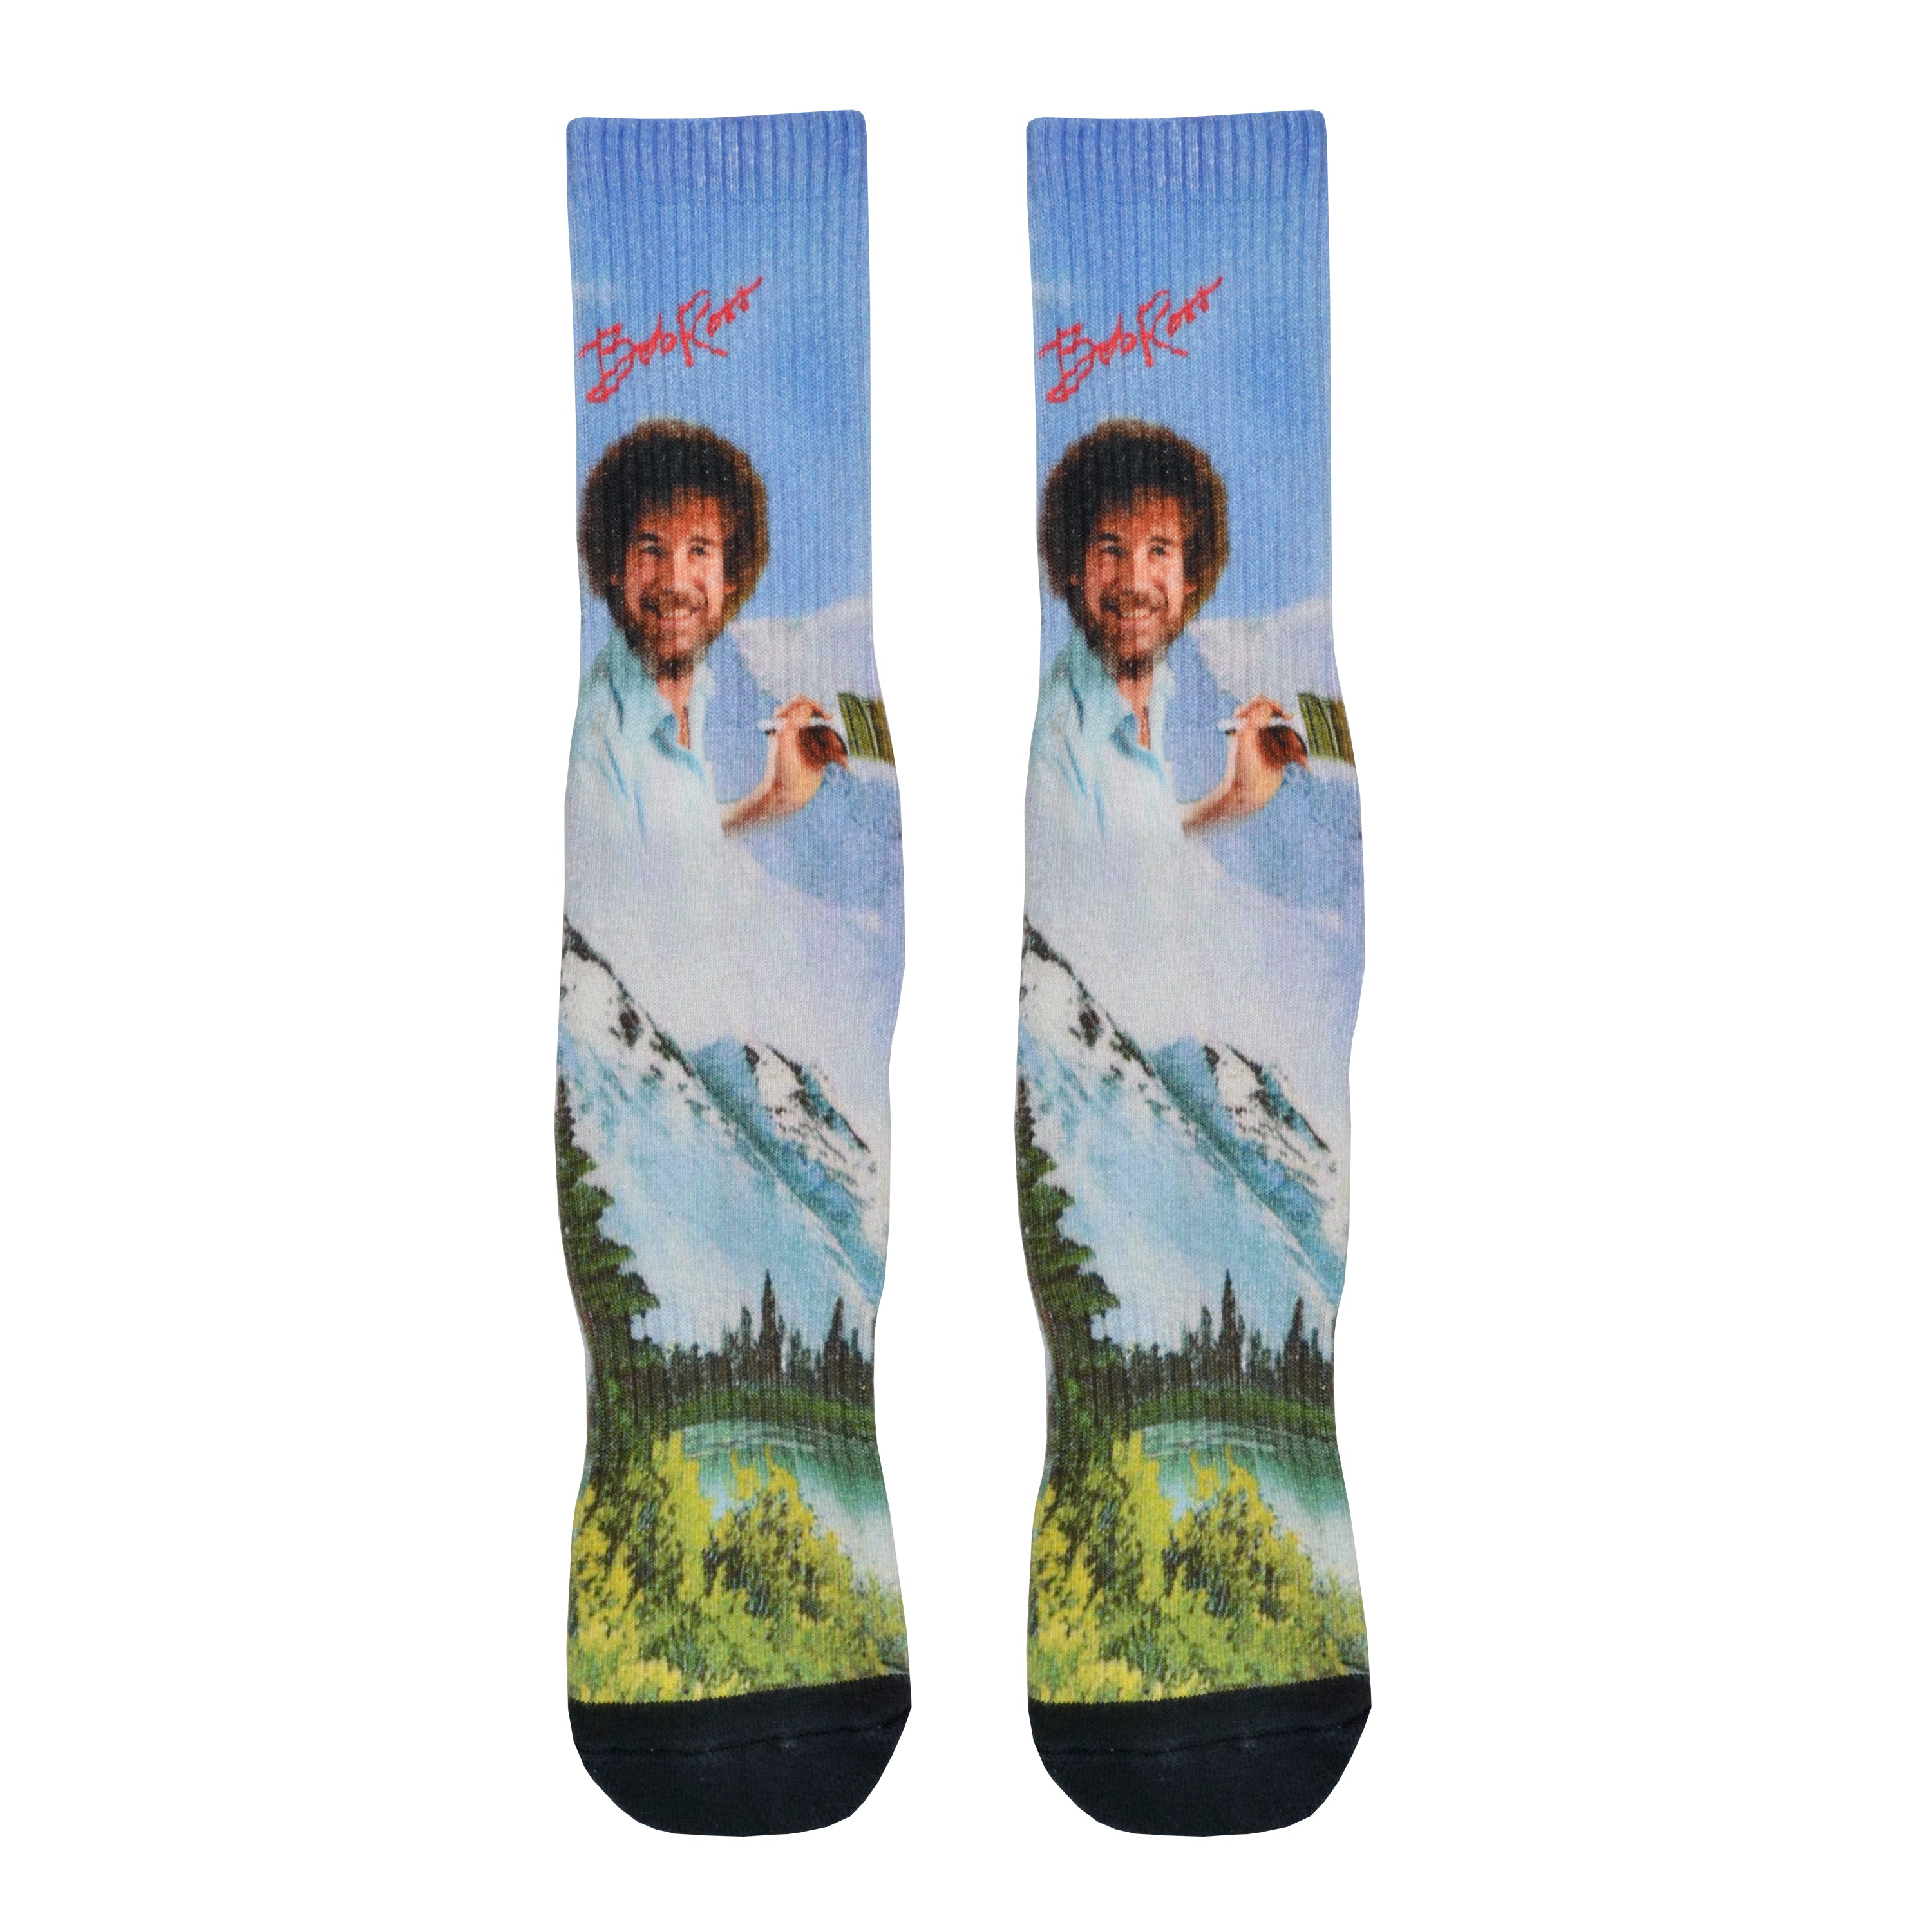 Shown in a flatlay, a pair of Oooh Yeah’s cotton men’s crew socks with light blue nature-scape and Bob Ross portrait